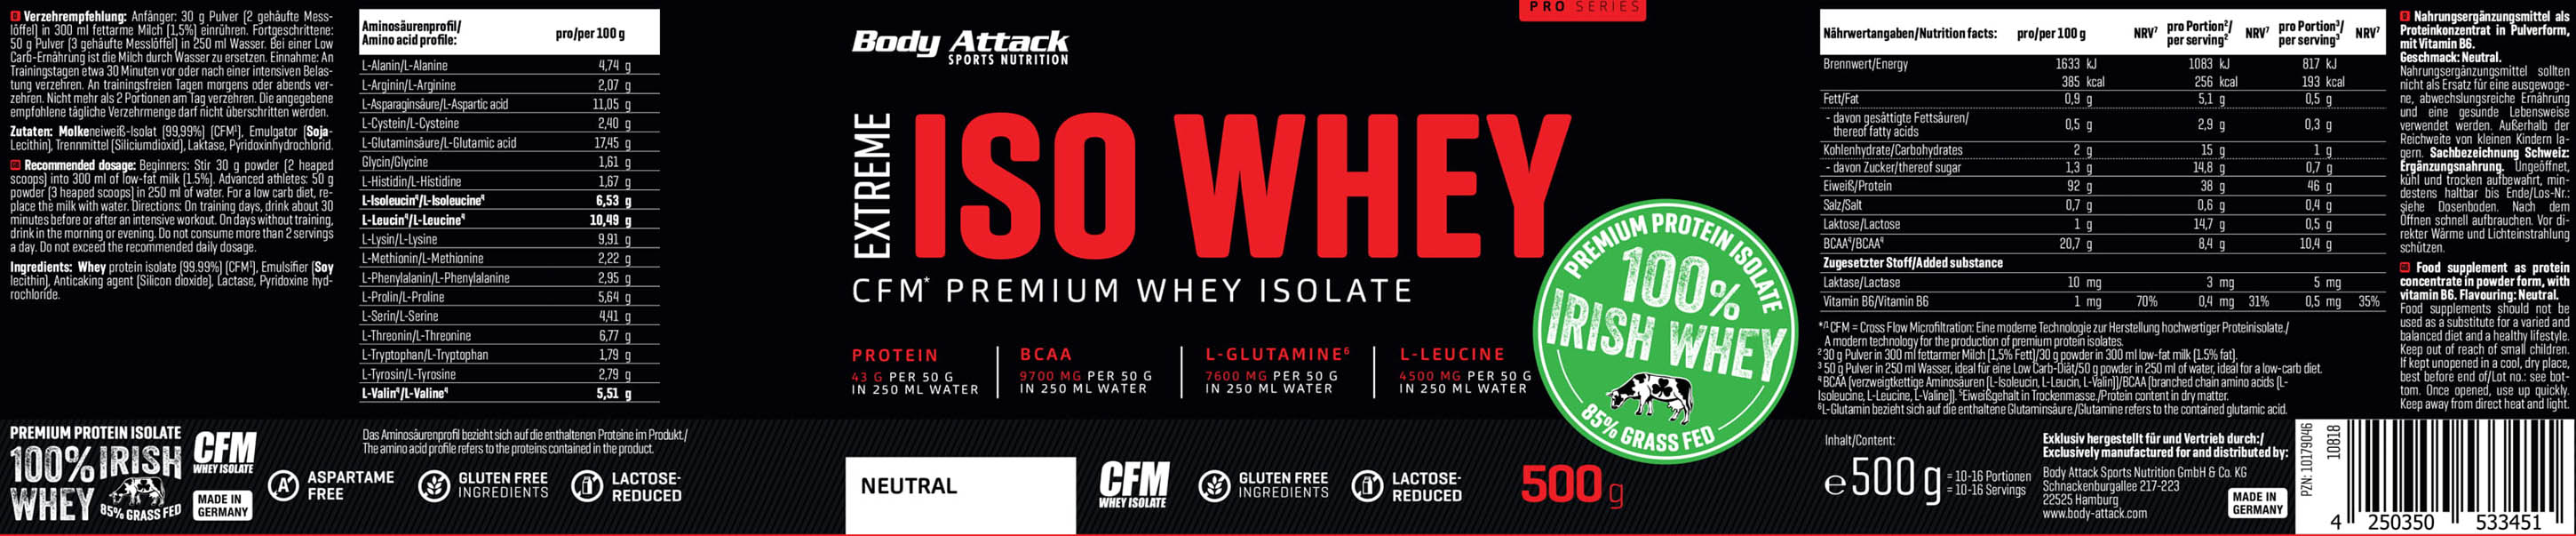 Body Attack Extreme Iso Whey Professional (1800g Dose)